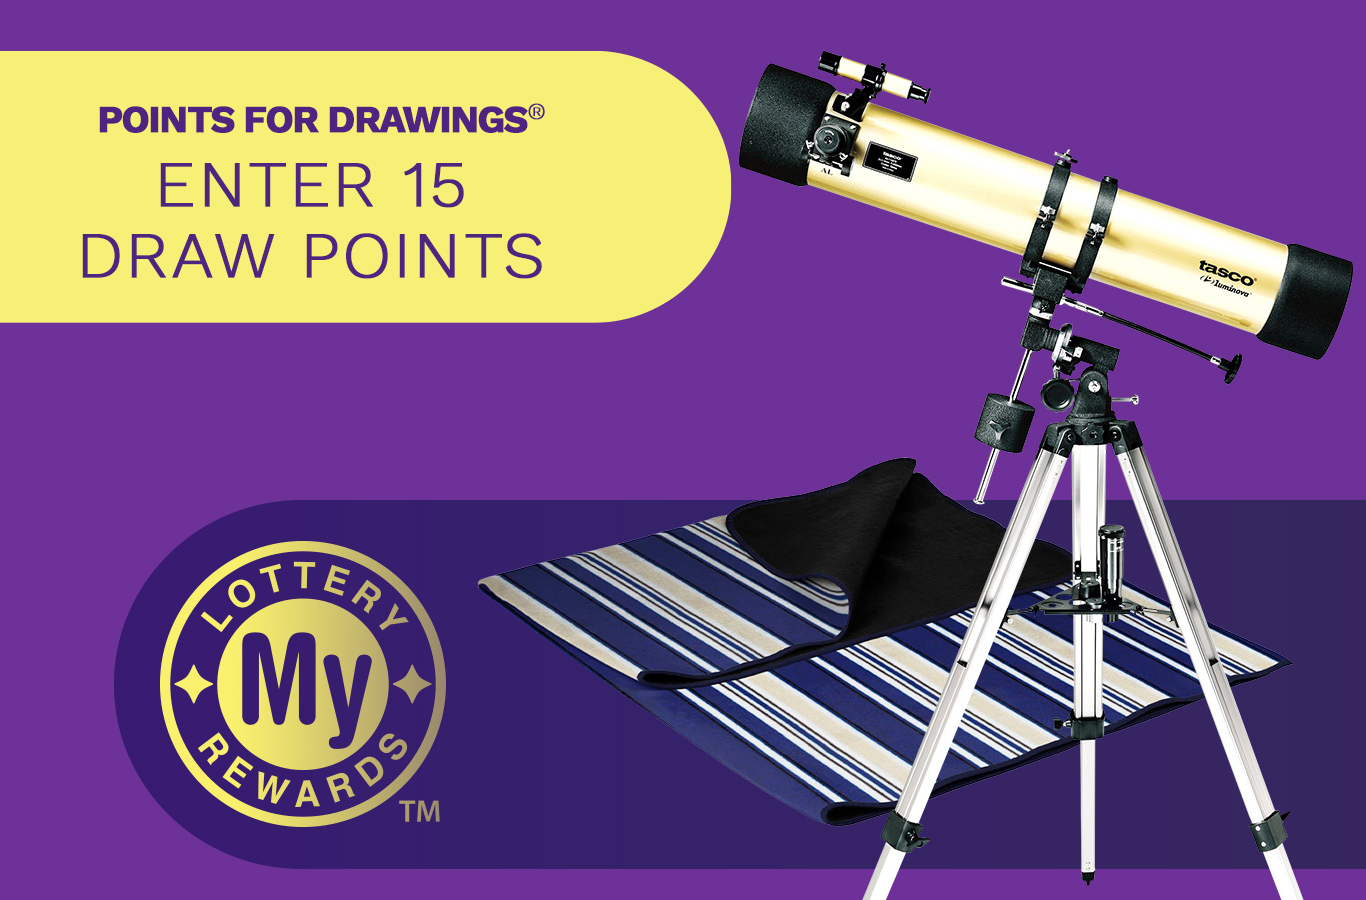 Here's your chance to win a Telescope and Blanket! Enter by Monday, September 4th.